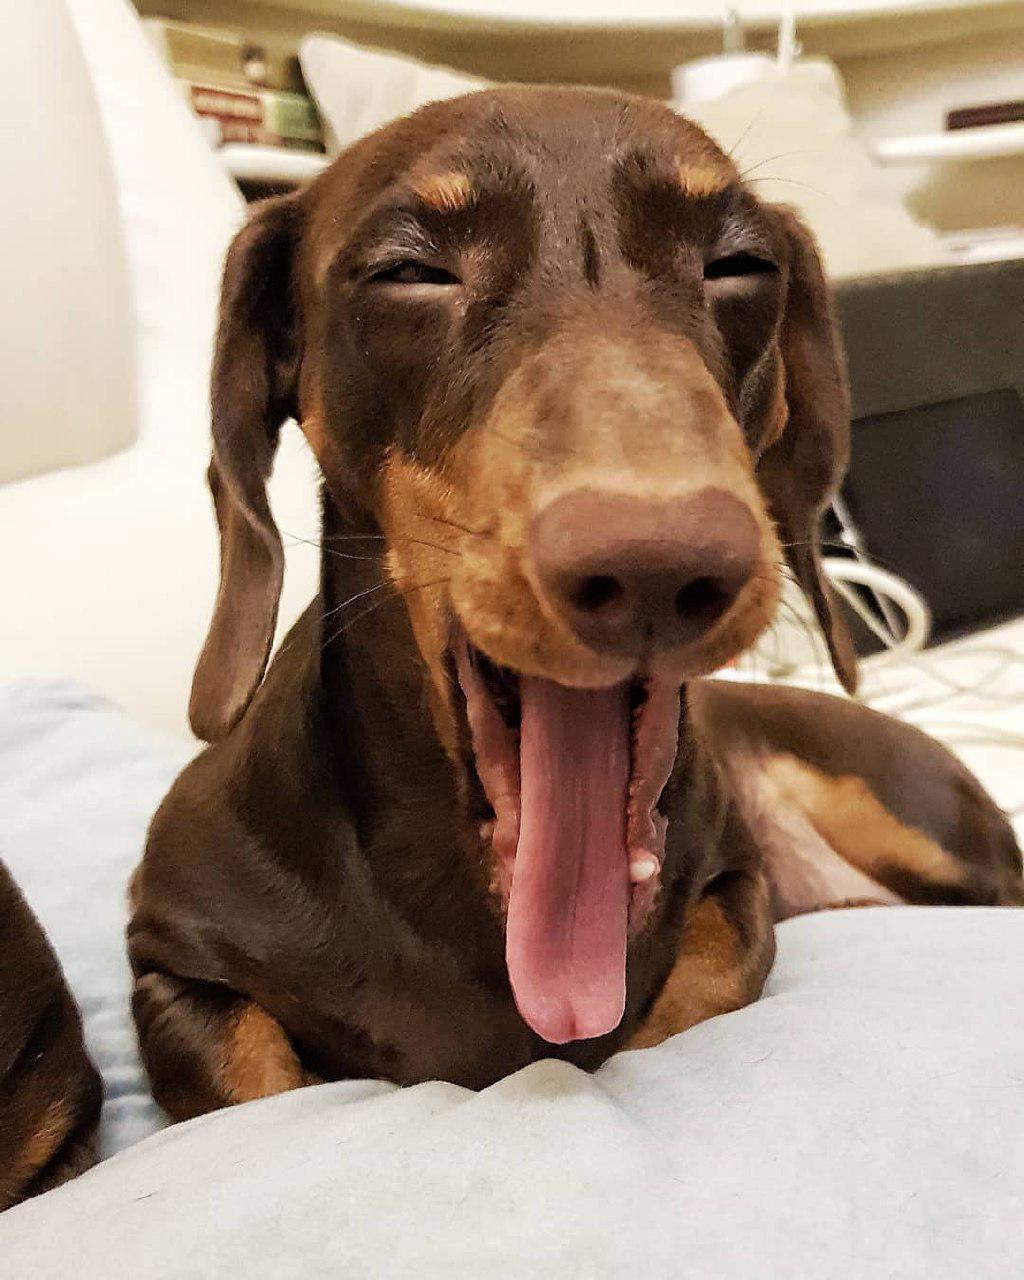 A yawning Dachshund while lying on the bed